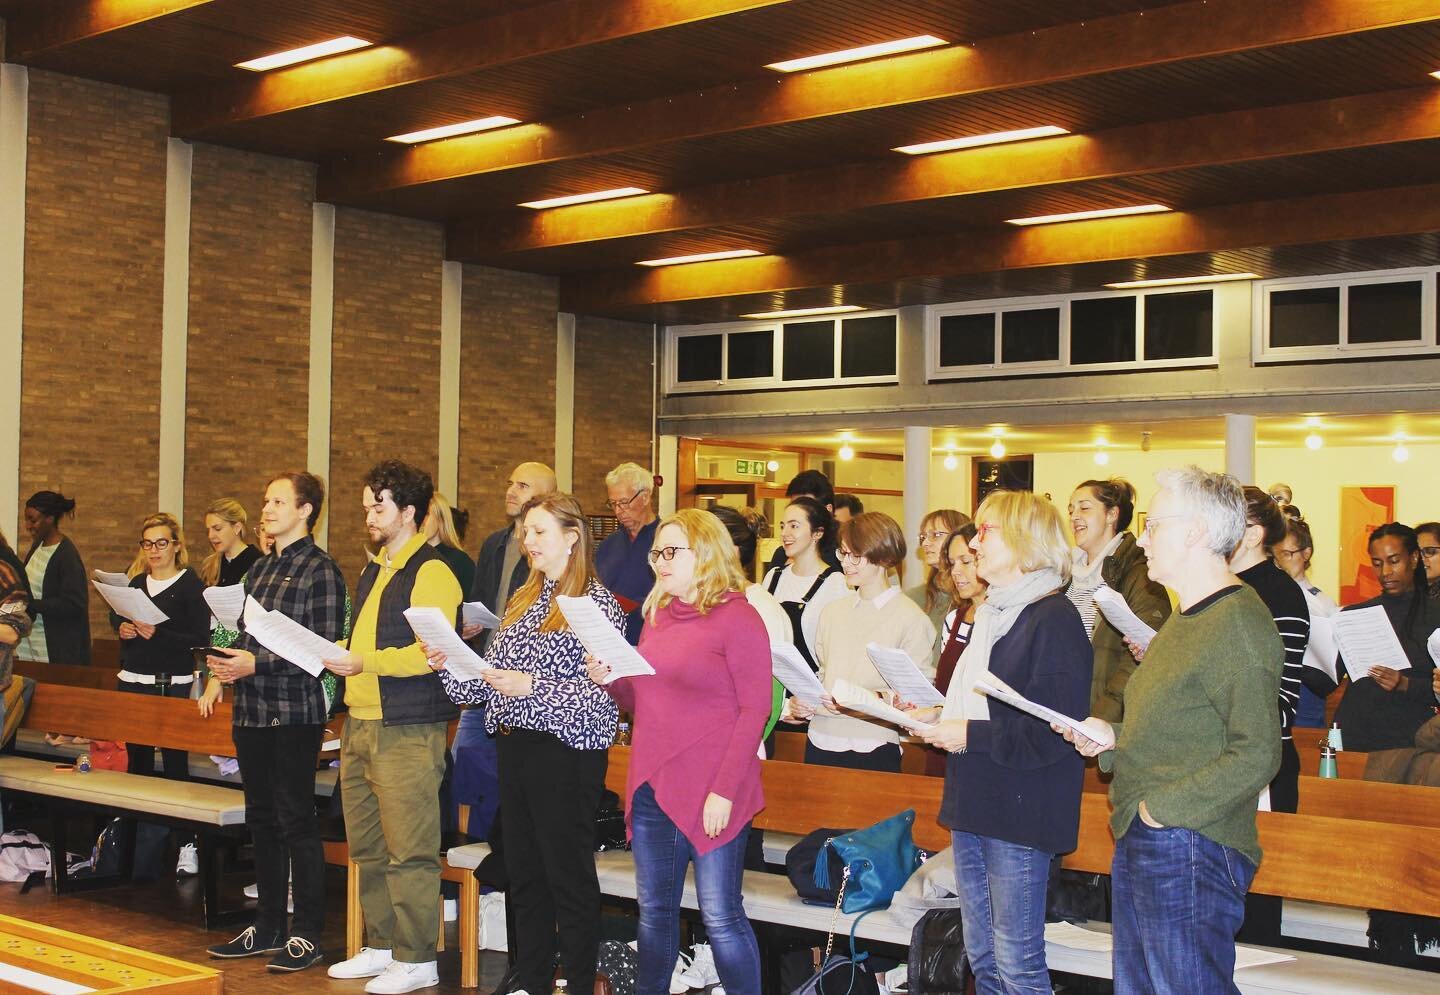 A huge welcome to all our new singers in Crystal Palace! Three weeks in and sounding great already! 🙌 #crystalpalacechoir #se19